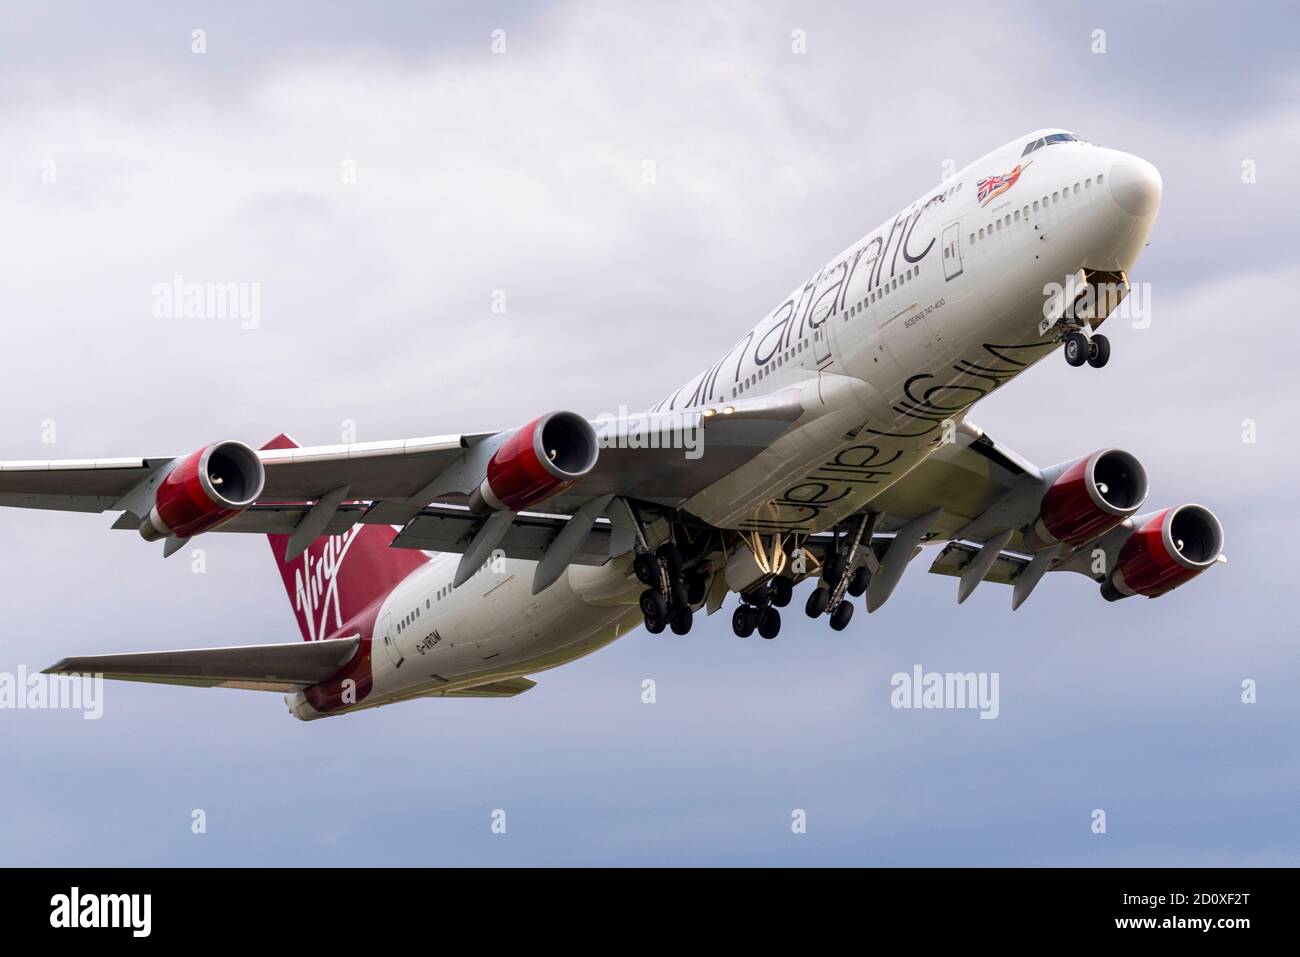 Virgin Atlantic Boeing 747 Jumbo Jet plane taking off from London Heathrow Airport, UK, after being stored. Premature retirement due COVID19. Leaving Stock Photo